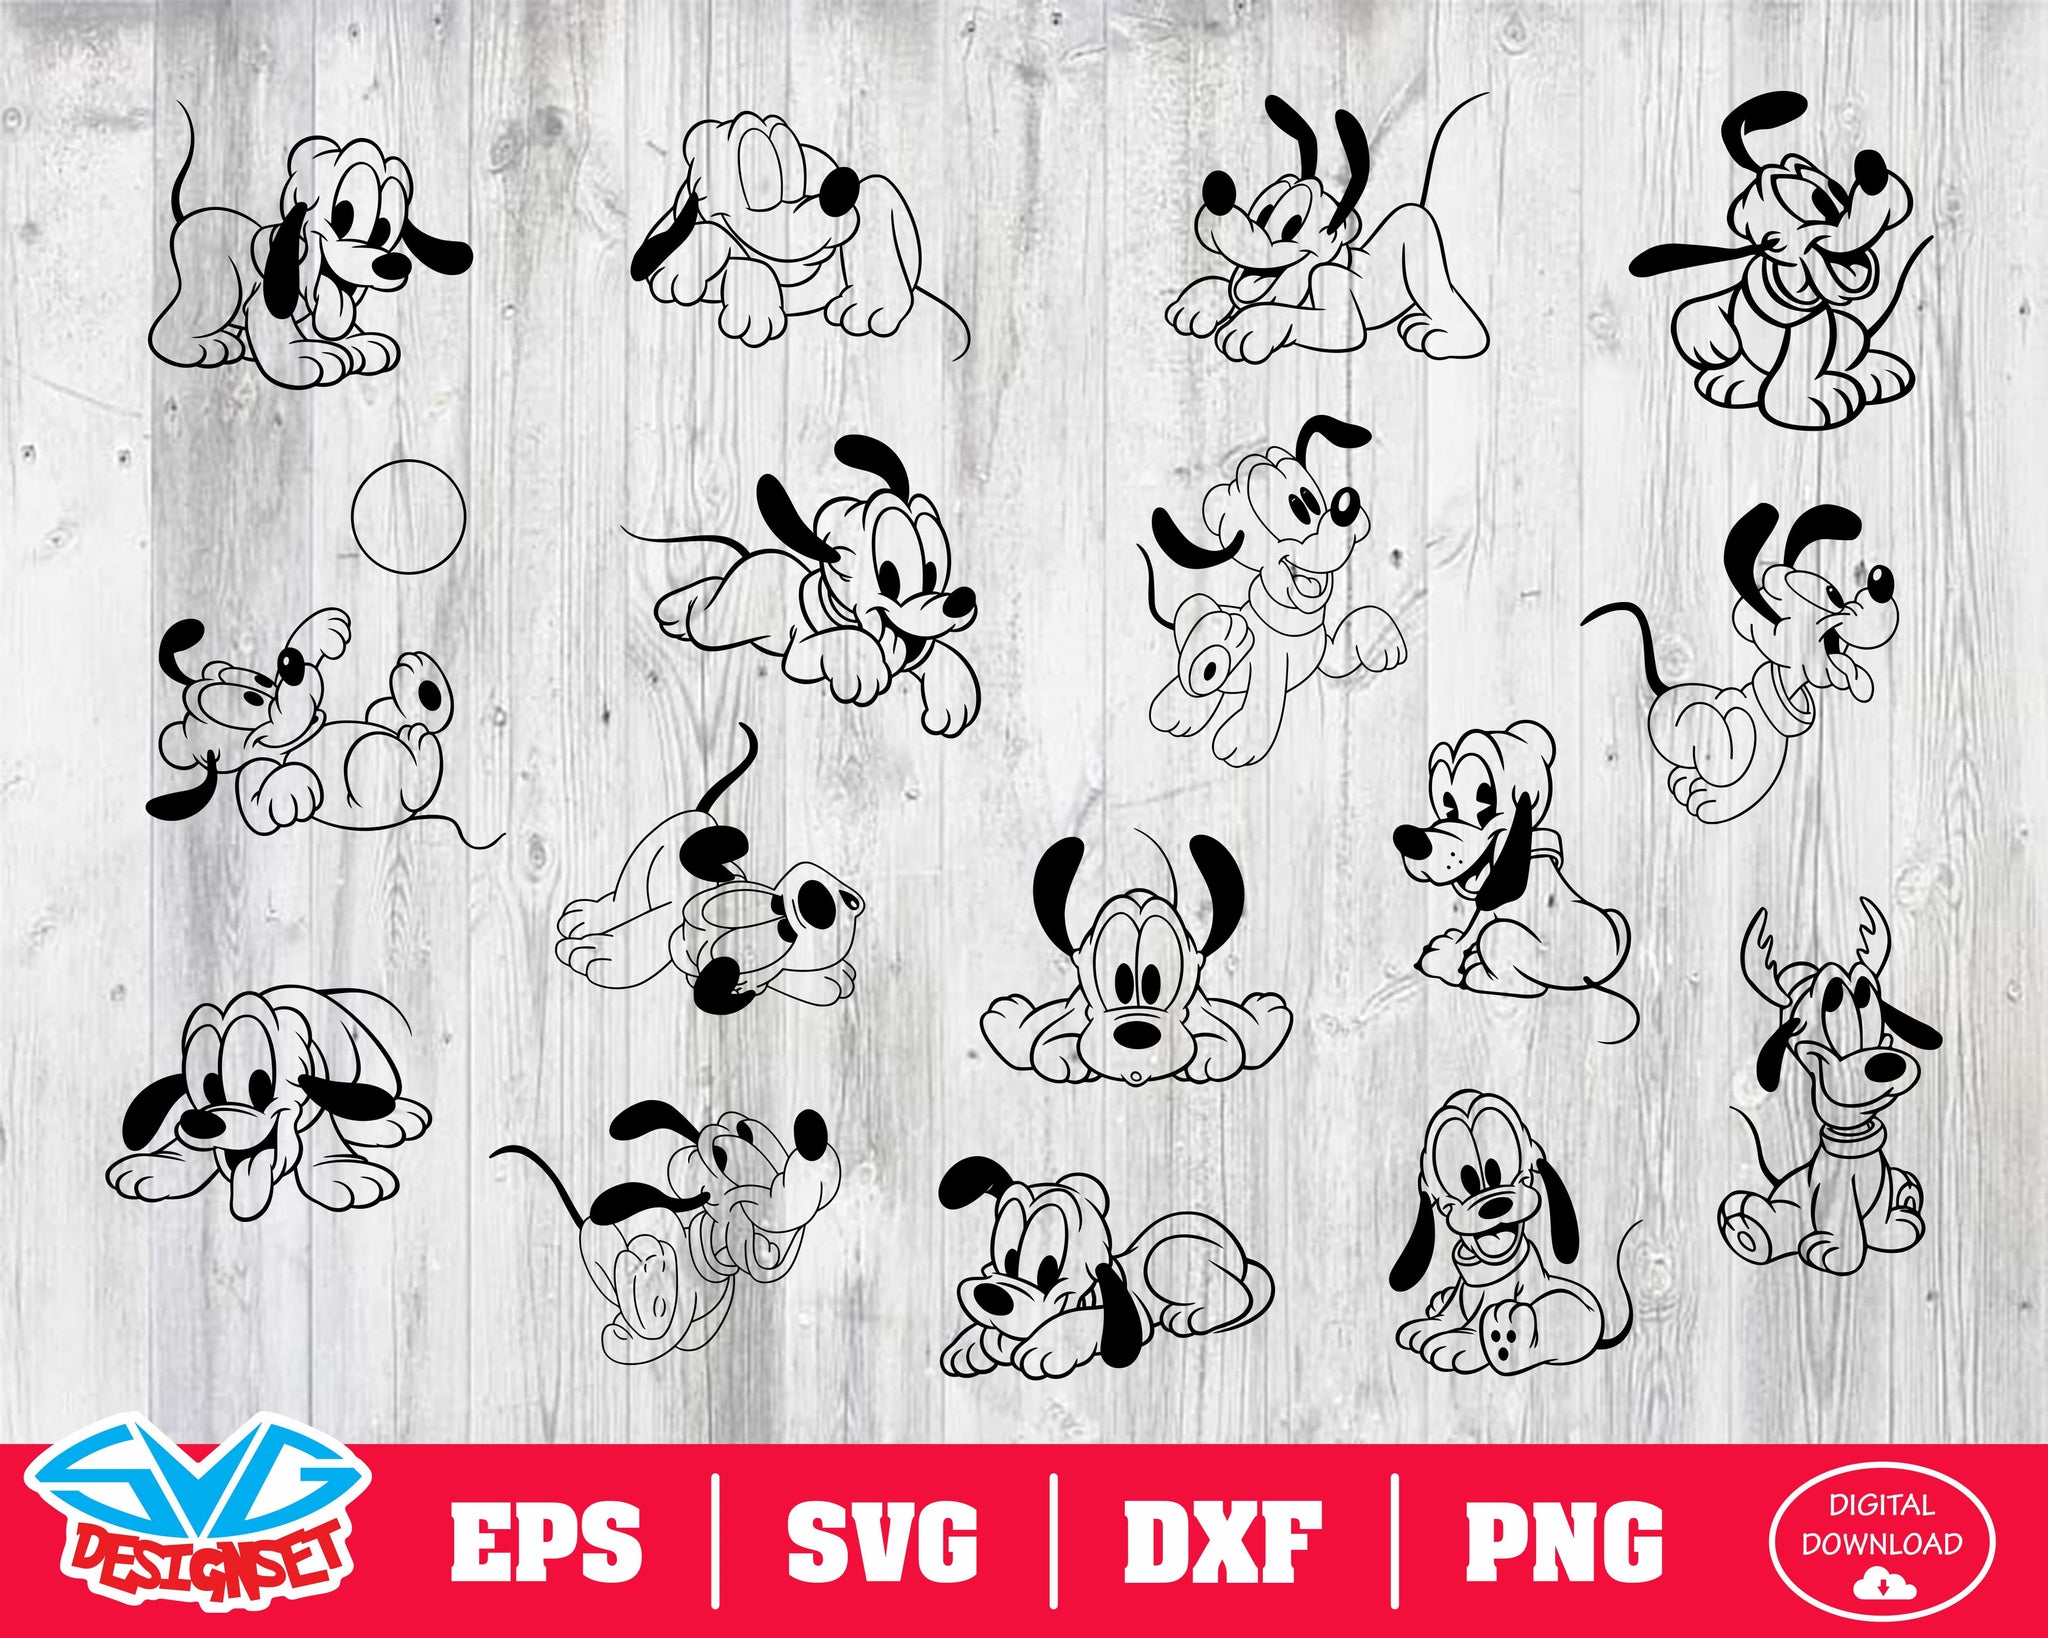 Pluto babies Svg, Dxf, Eps, Png, Clipart, Silhouette and Cutfiles #2 - SVGDesignSets